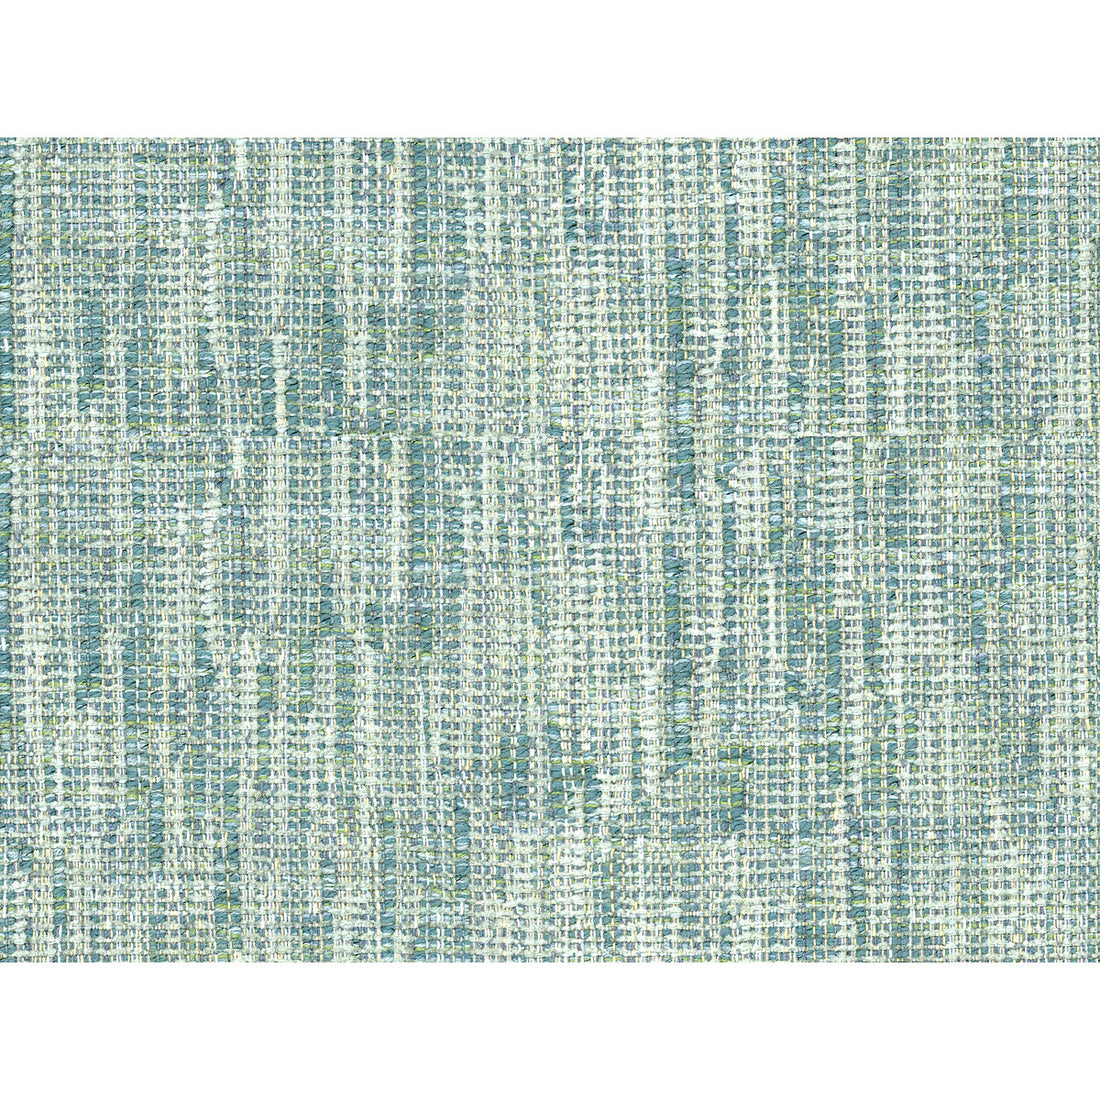 Morecambe Bay fabric in teal color - pattern 2016124.135.0 - by Lee Jofa in the Furness Weaves collection